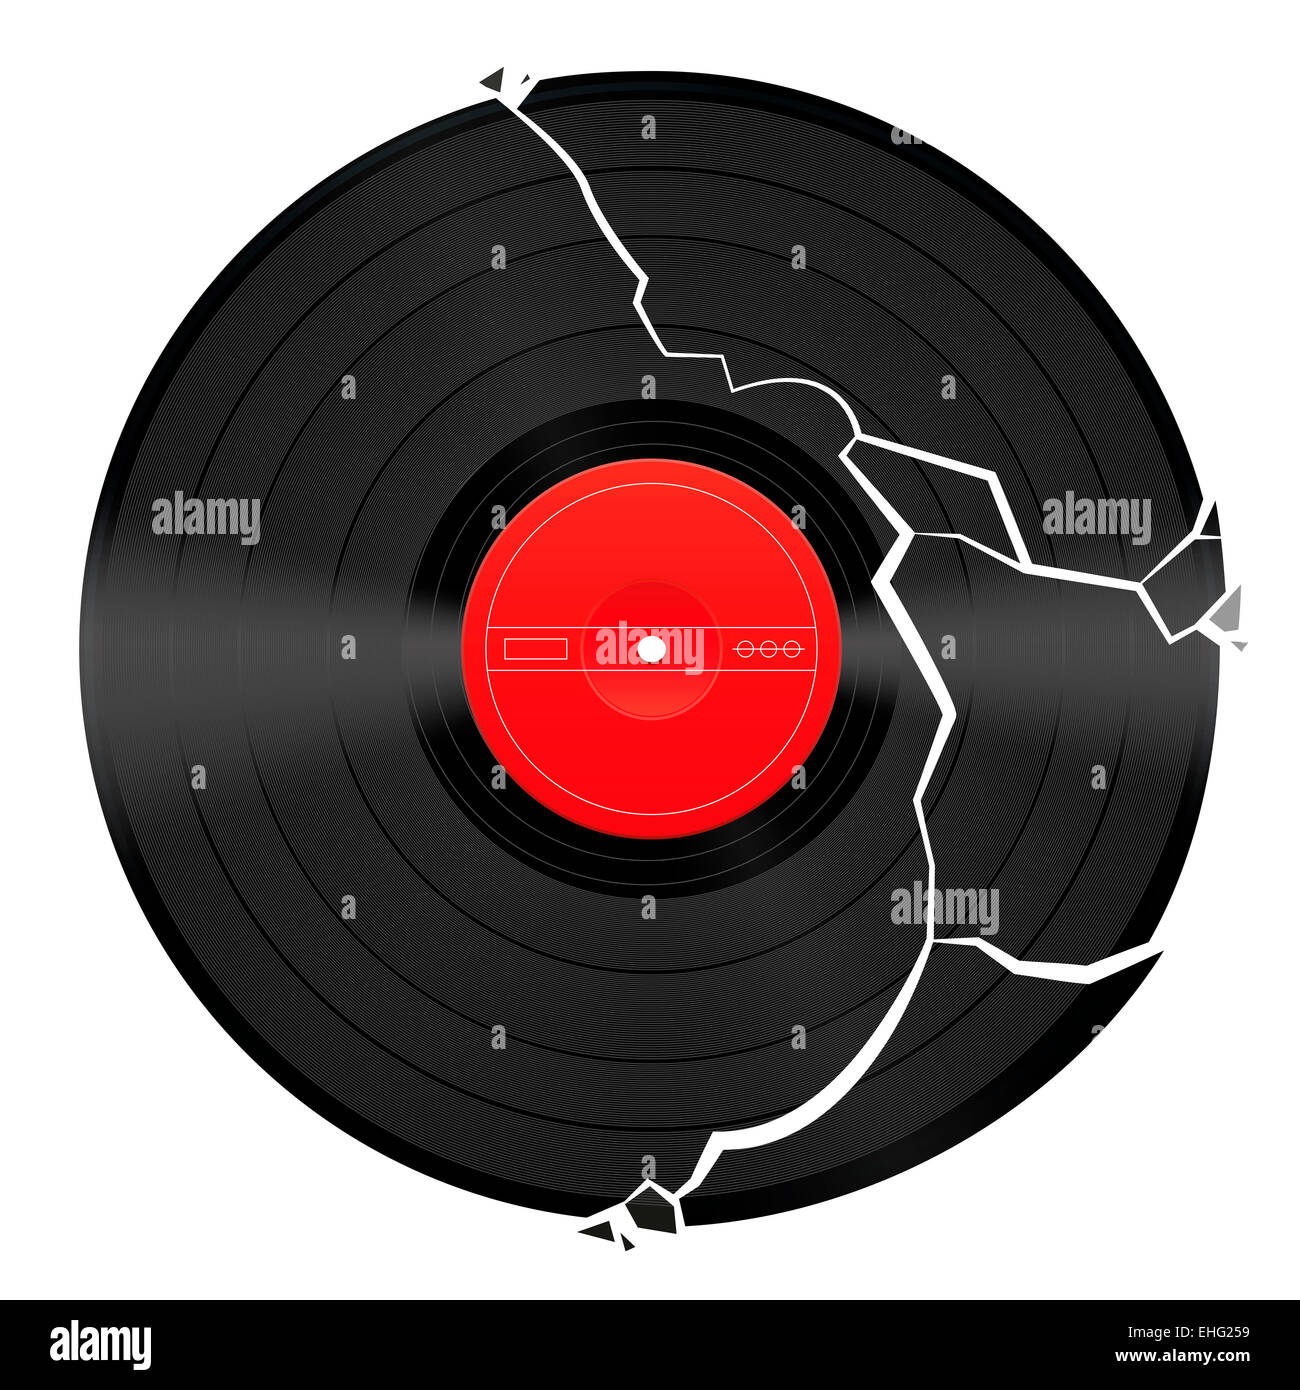 Broken vinyl record with unlabeled red center. Stock Photo